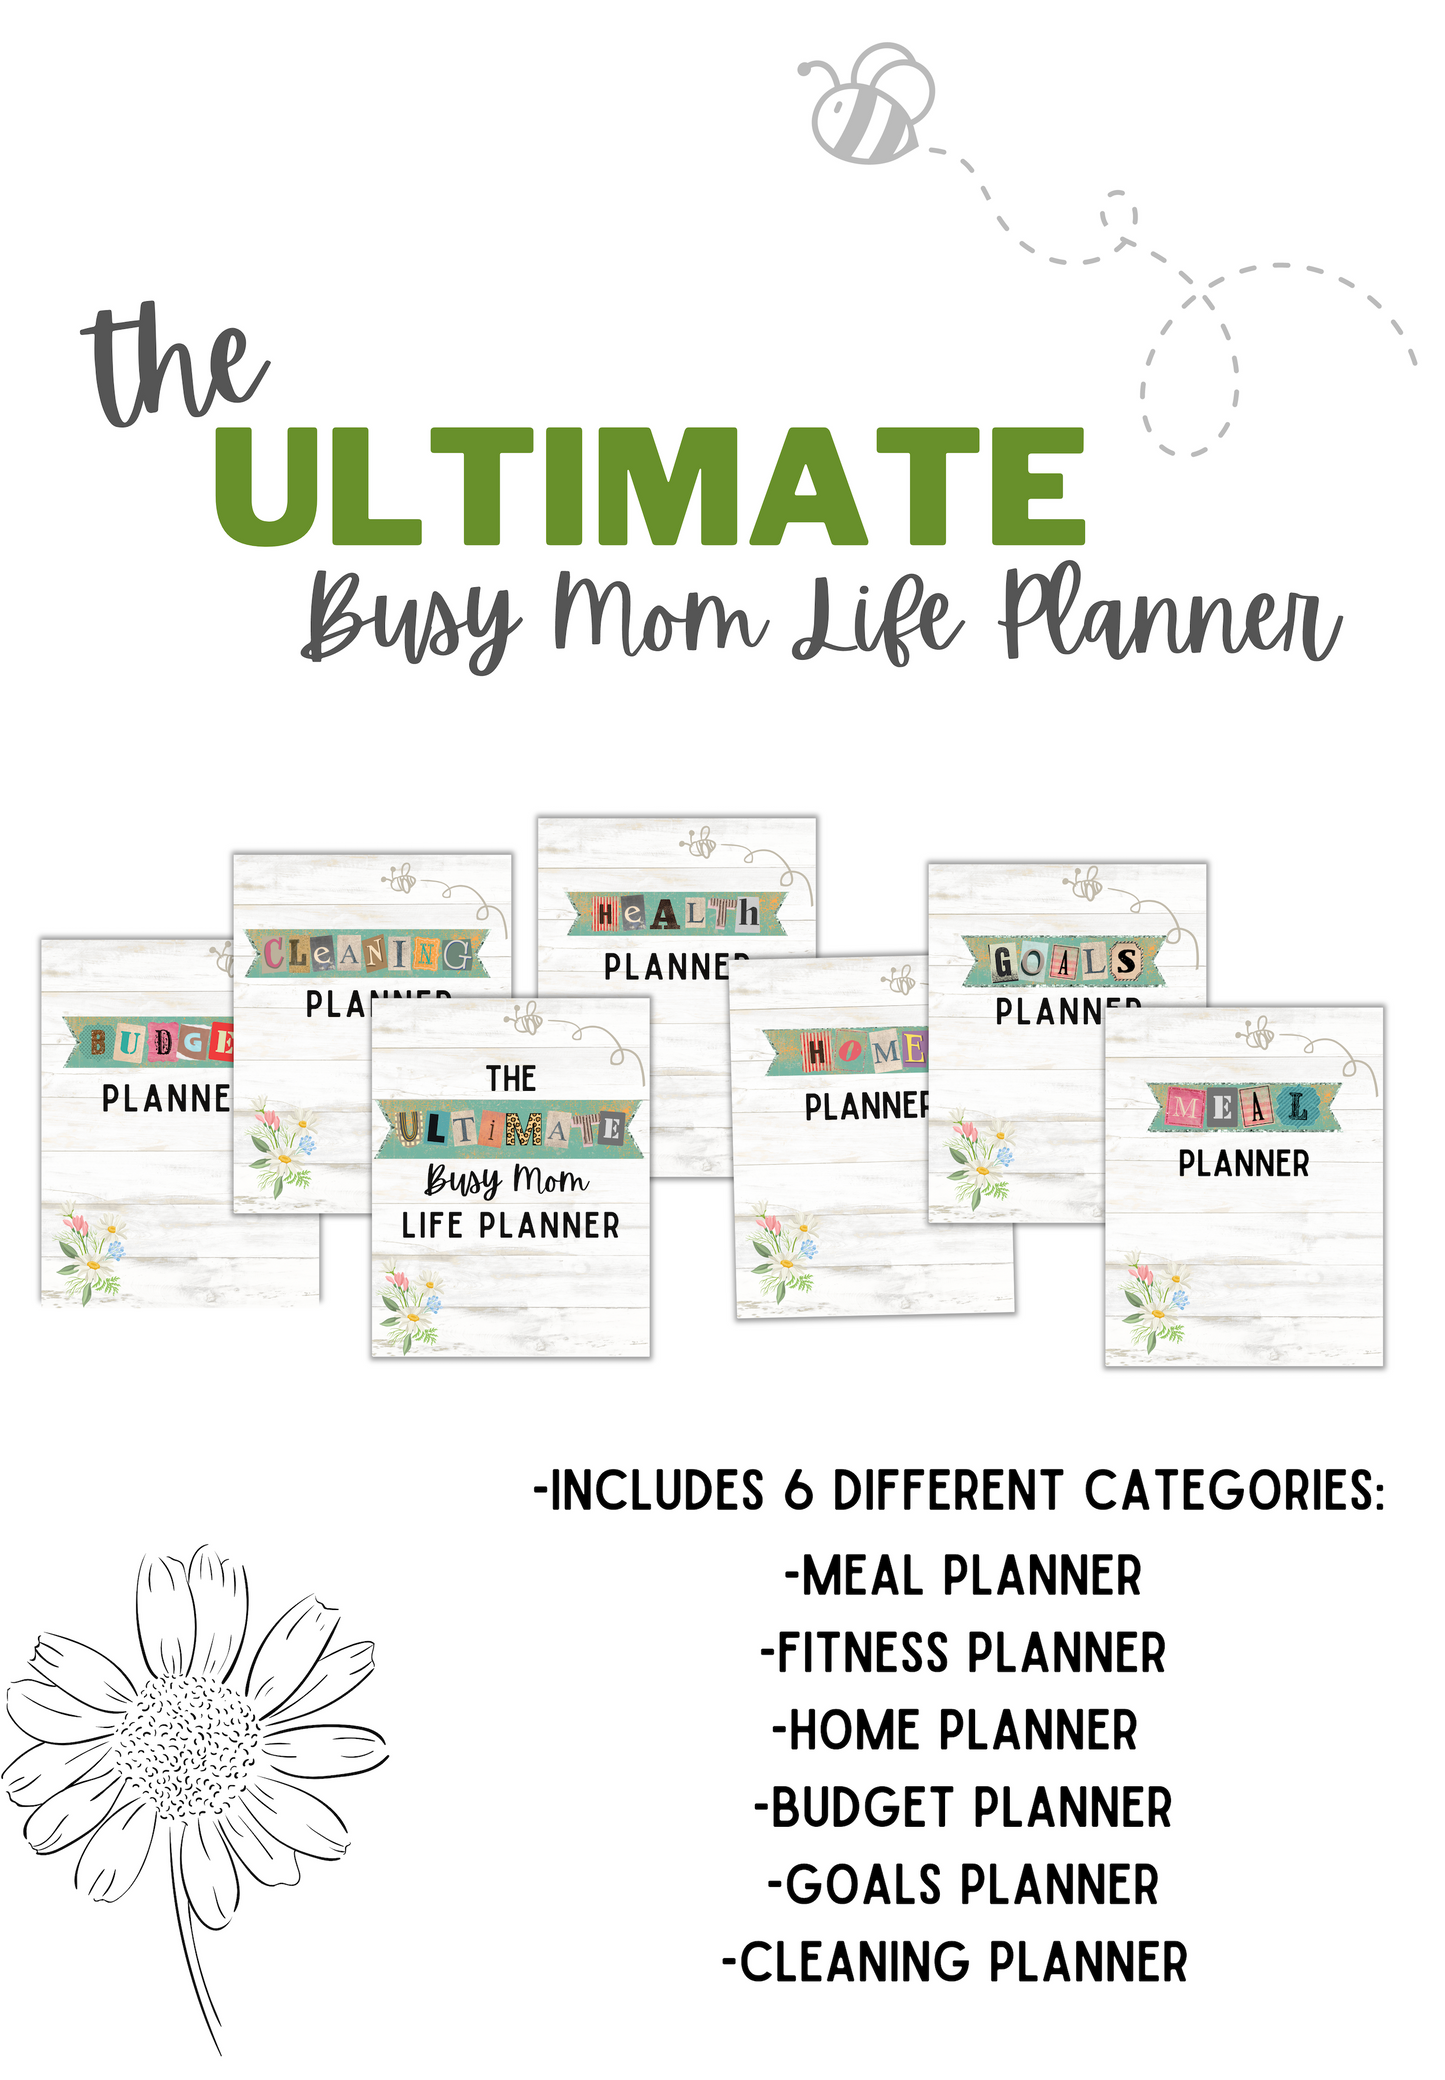 The Ultimate Busy Mom Life Planner (65 pages)